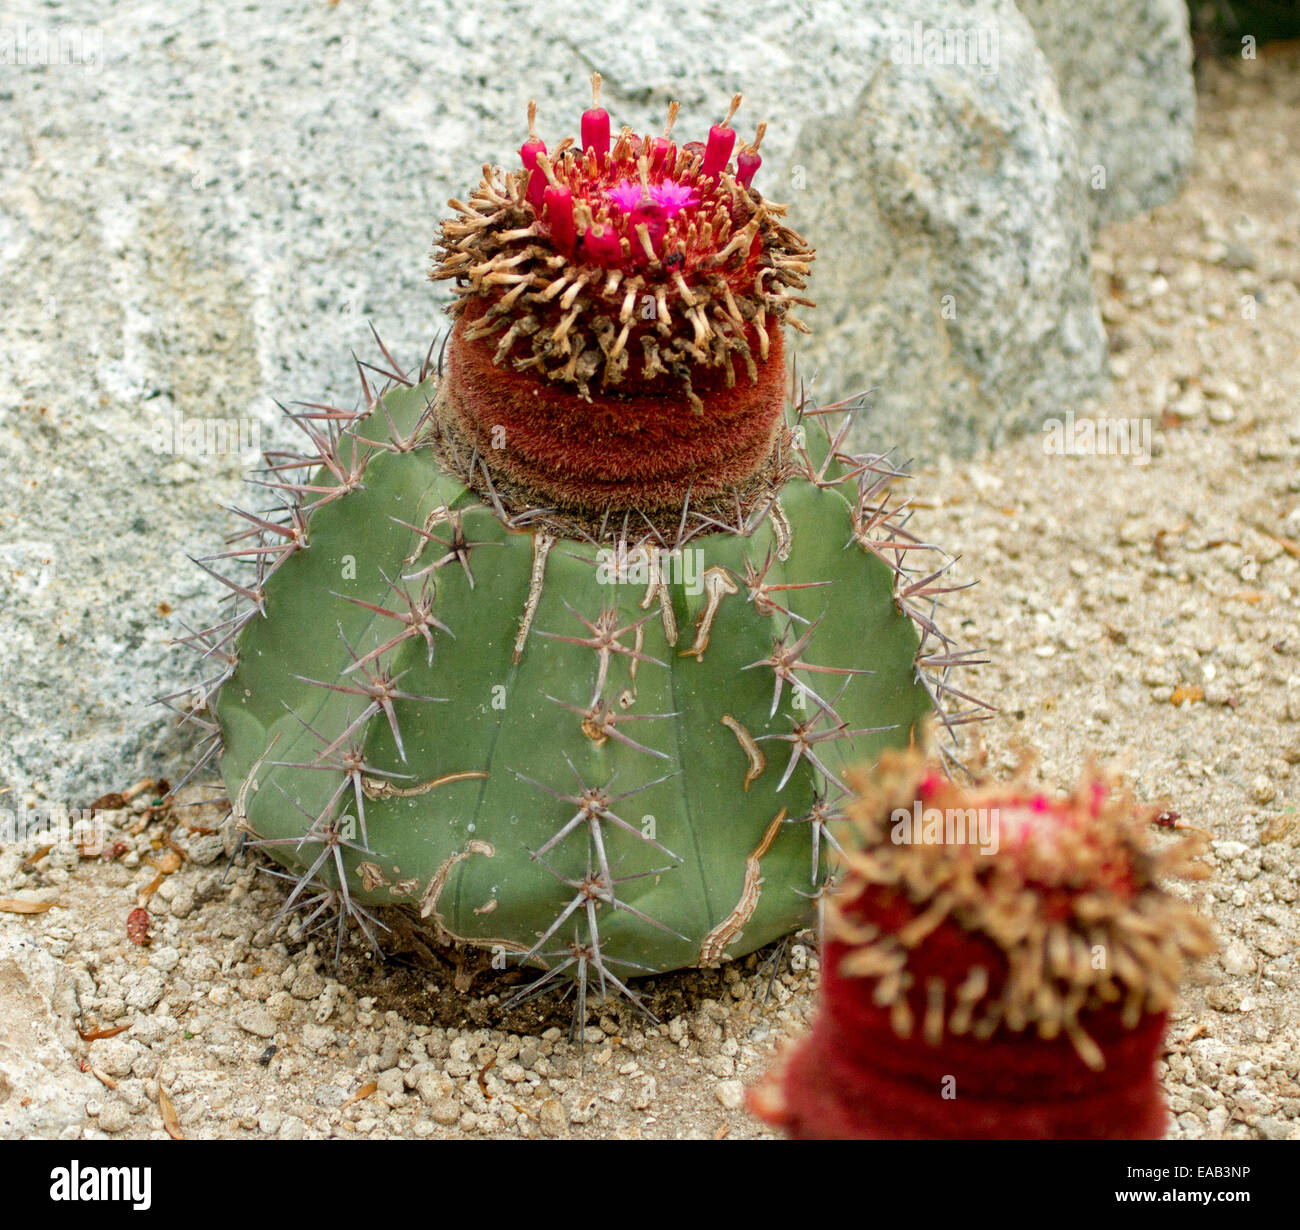 Melocactus, Turk's Cap cactus, growing and with red flowers in Sun Pavilion at Gardens By The Bay in Singapore Stock Photo